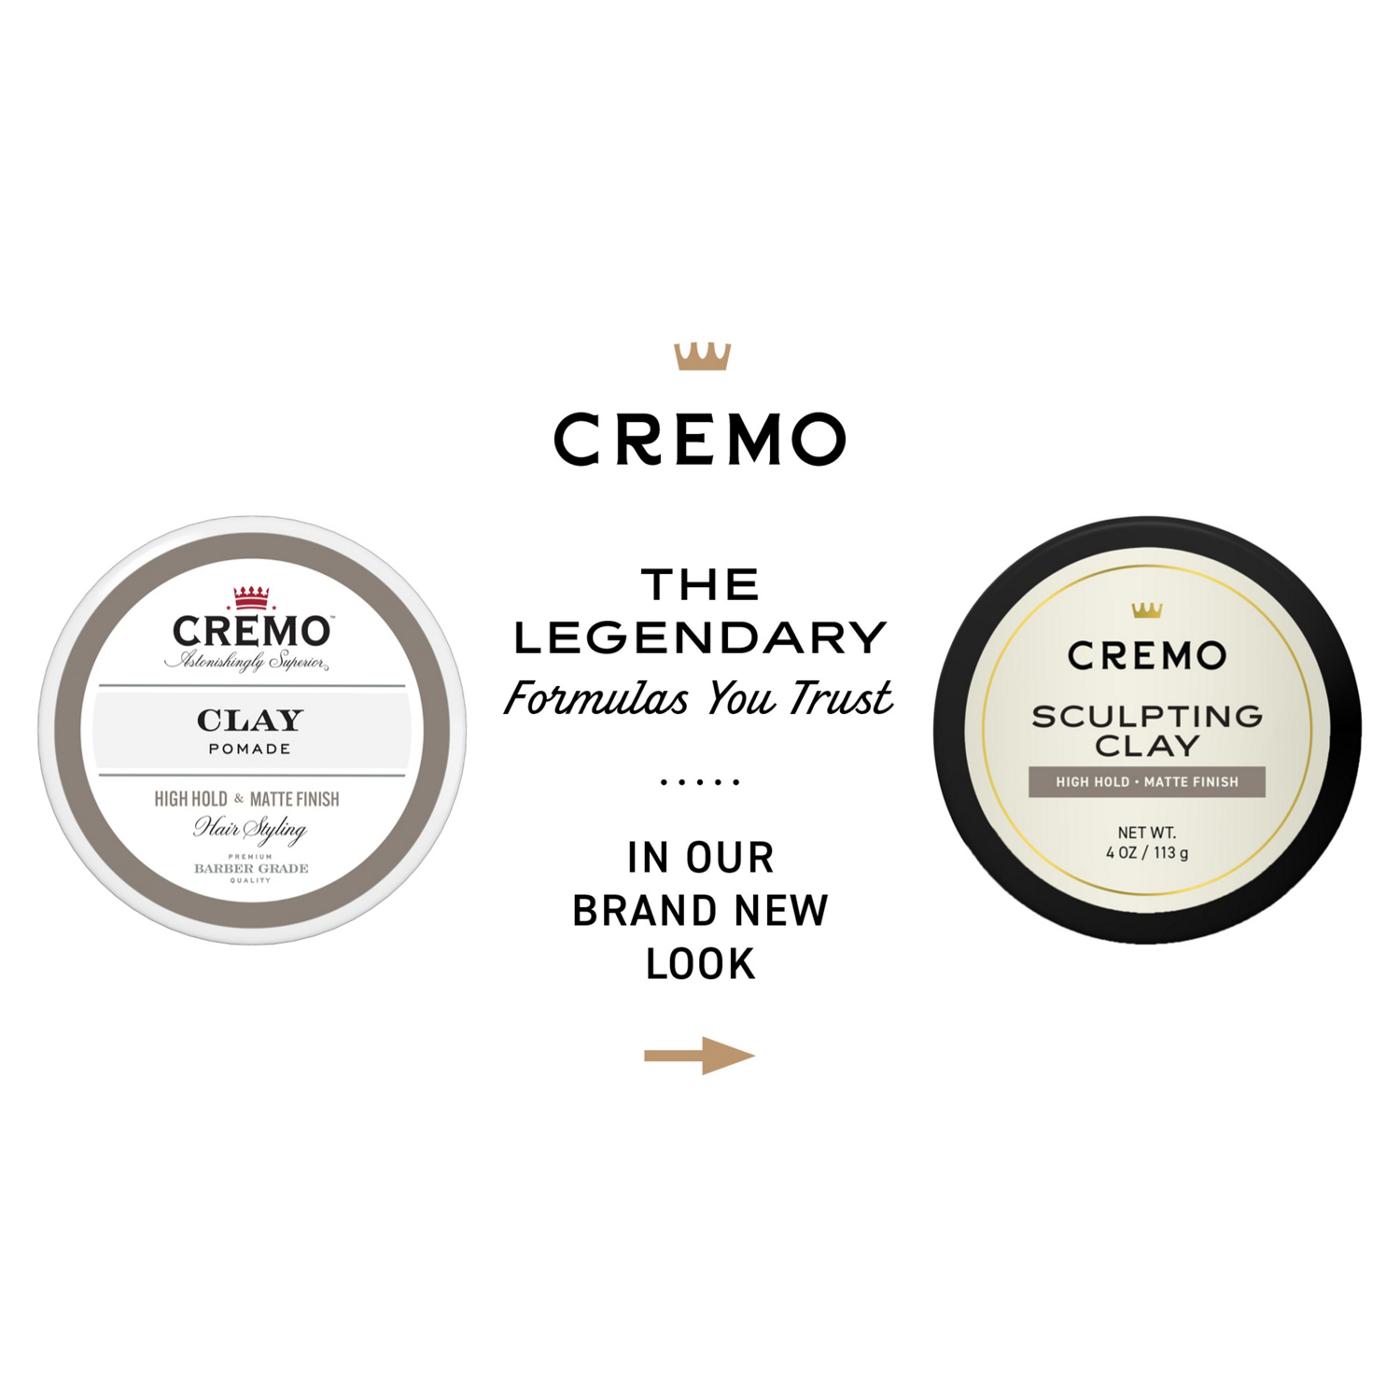 Cremo Sculpting Clay Hair Styling Pomade; image 4 of 5